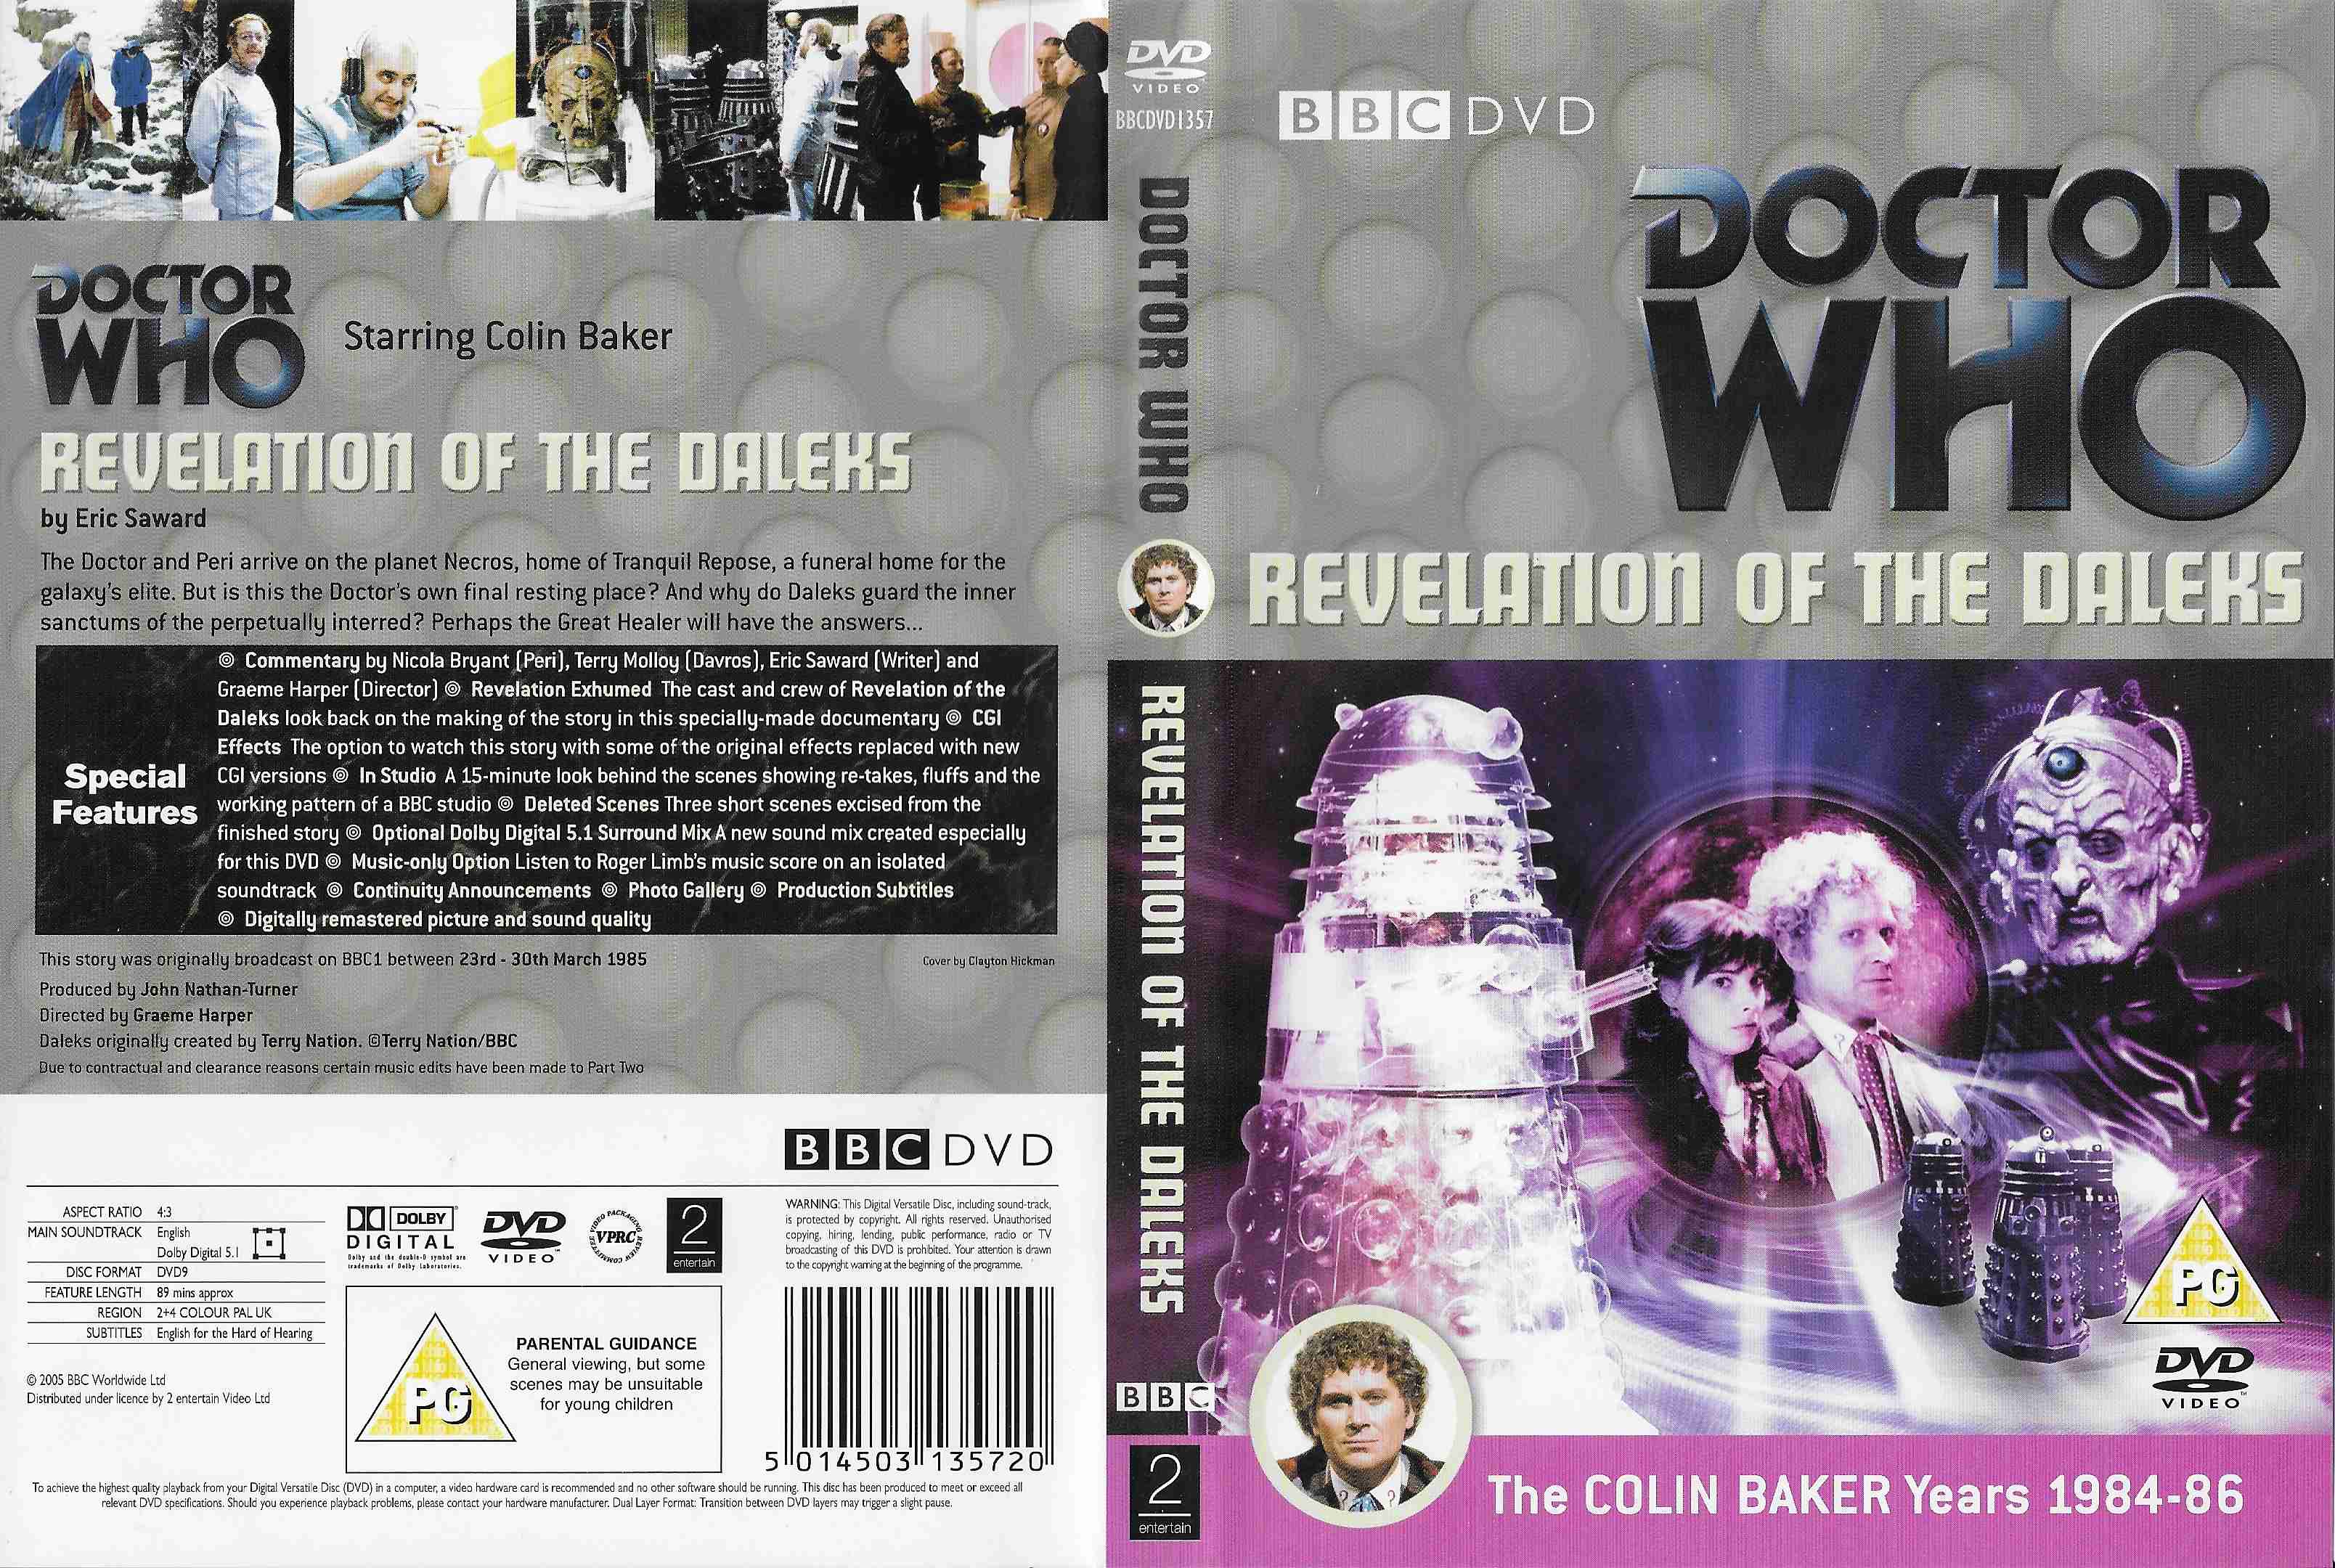 Picture of BBCDVD 1357 Doctor Who - Revelation of the Daleks by artist Eric Saward from the BBC records and Tapes library